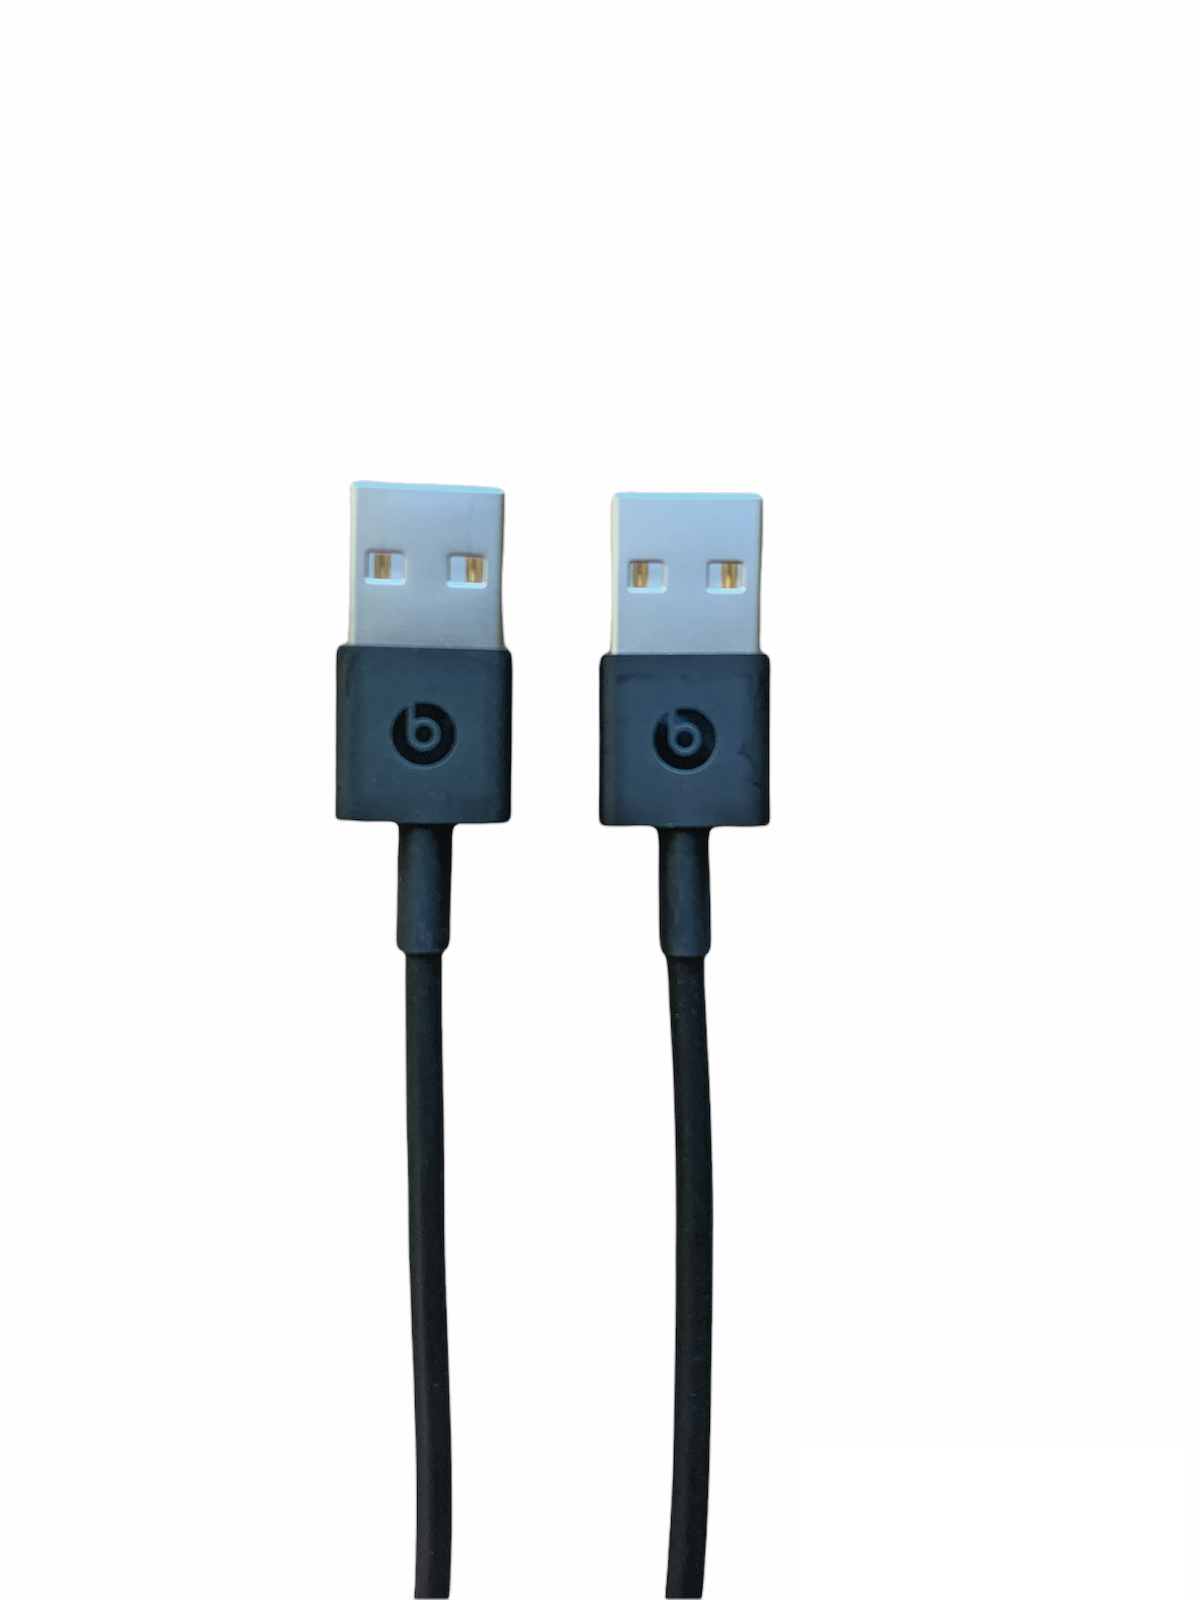 2 PACK - Beats by Dr. Dre Lightning to USB 6" Cable (MFI Certified)